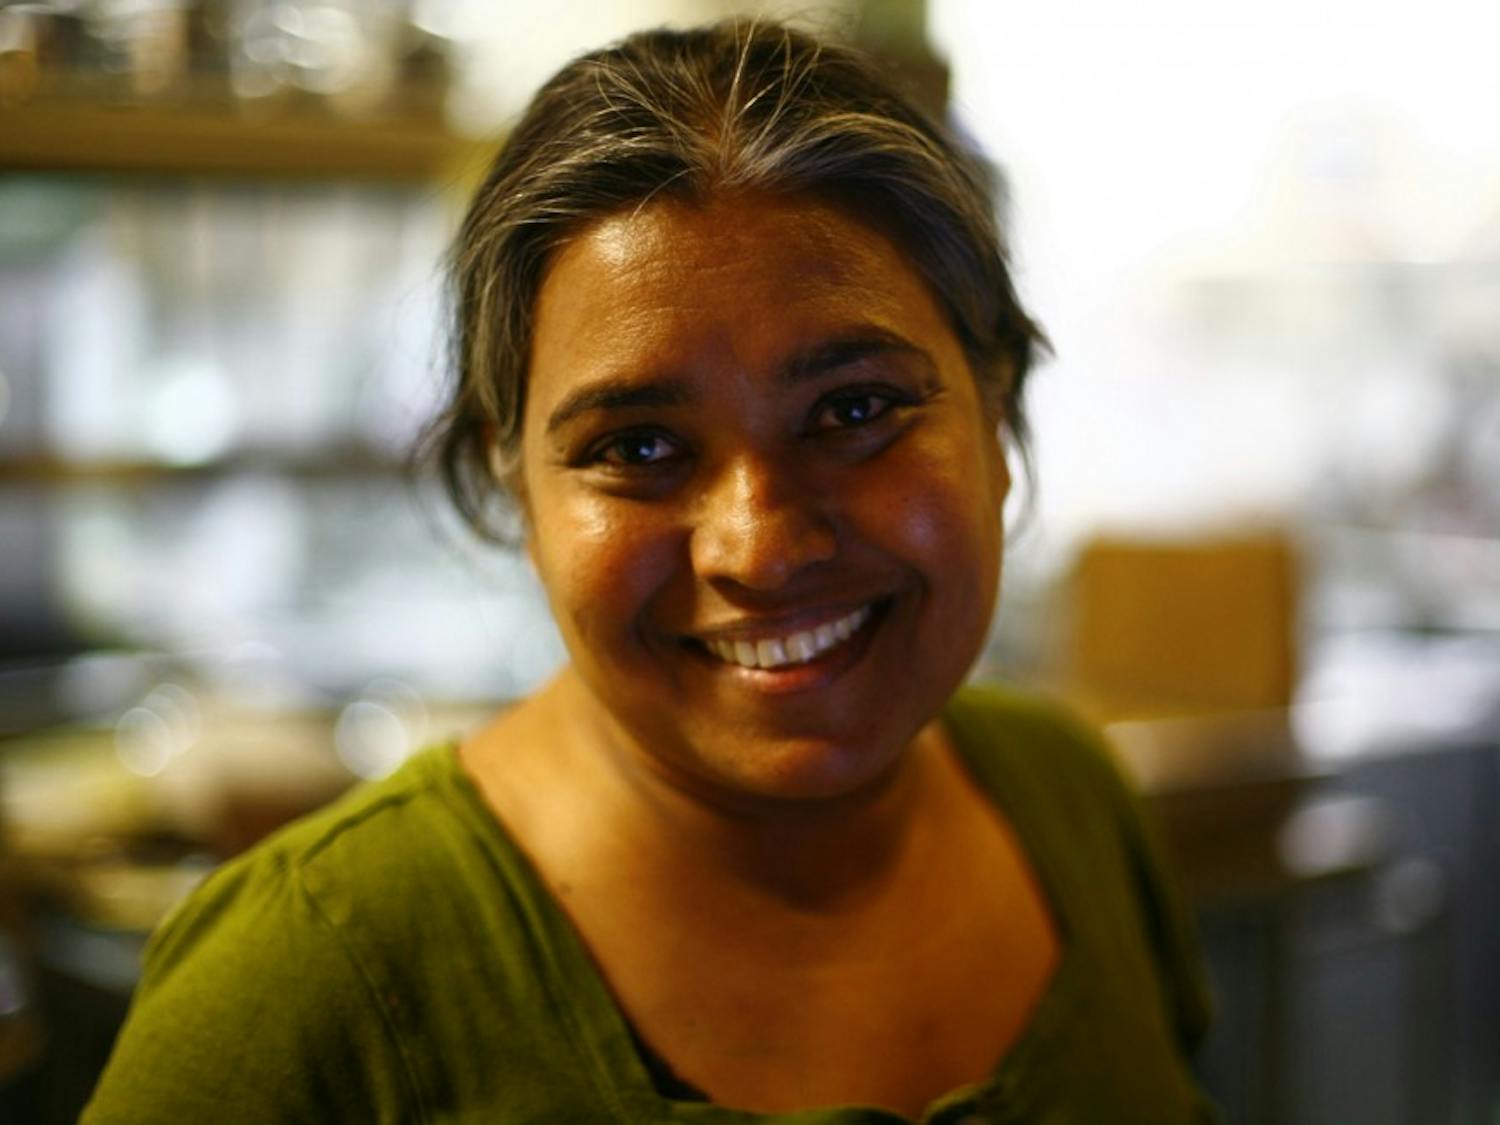 	Vimala Rajendran, owner of Vimala’s Curryblossom Café, is a sexual assault survivor and speaks out against violence against women.